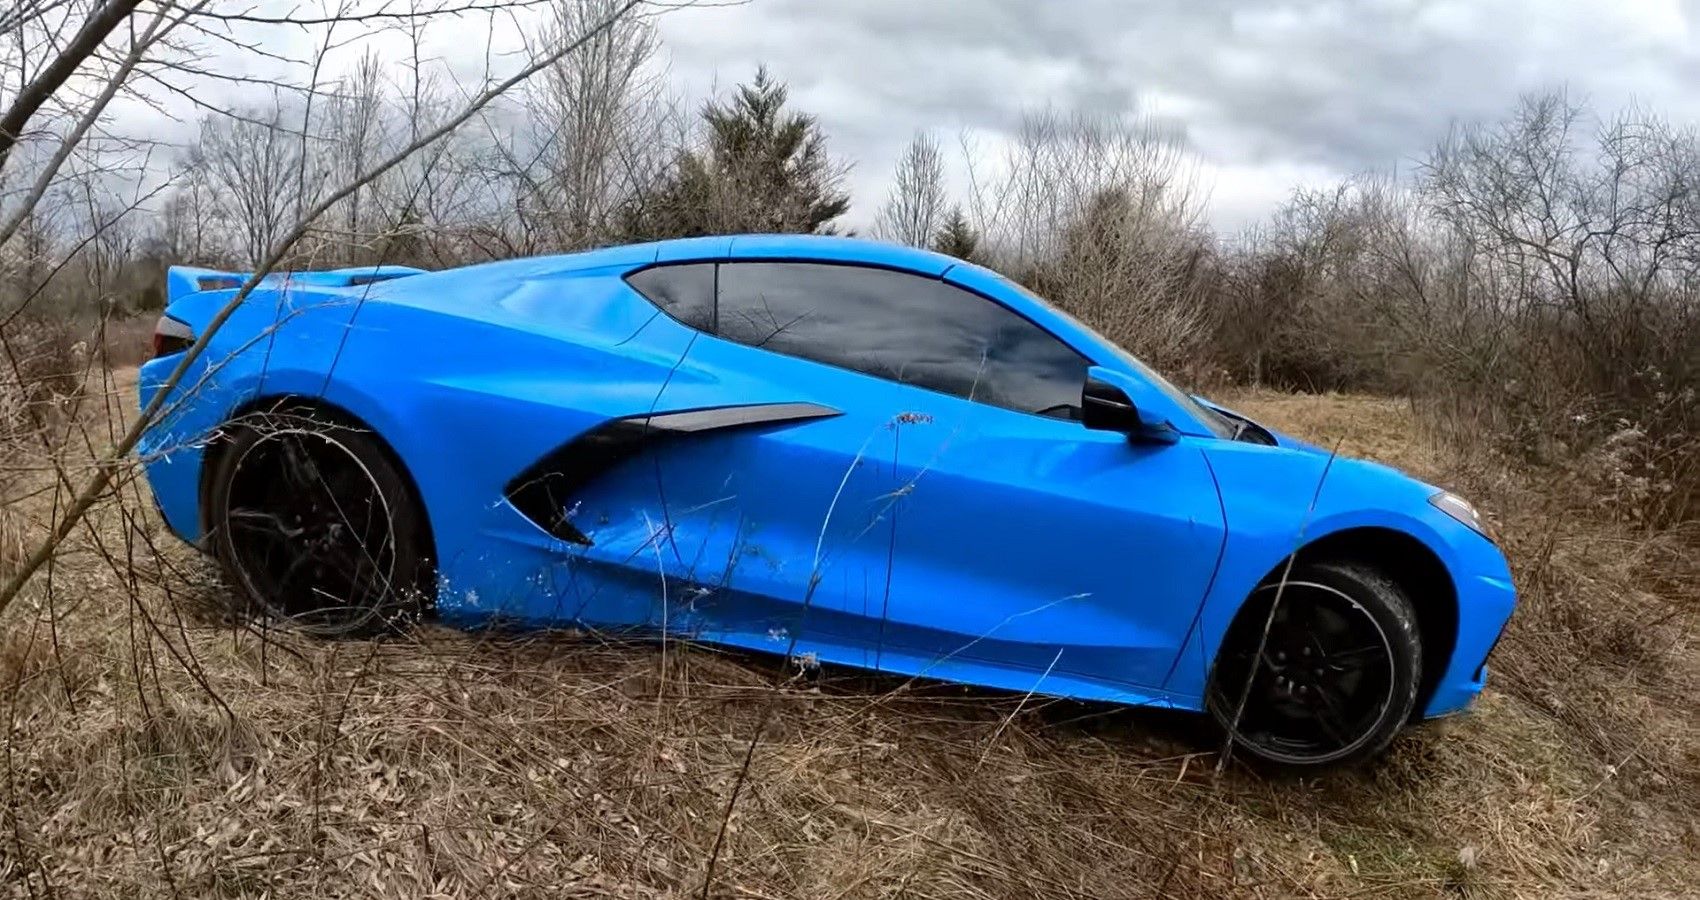 In A Surprise Twist, This Off-Roading C8 Chevrolet Corvette Proves The C8 Is Built To Last